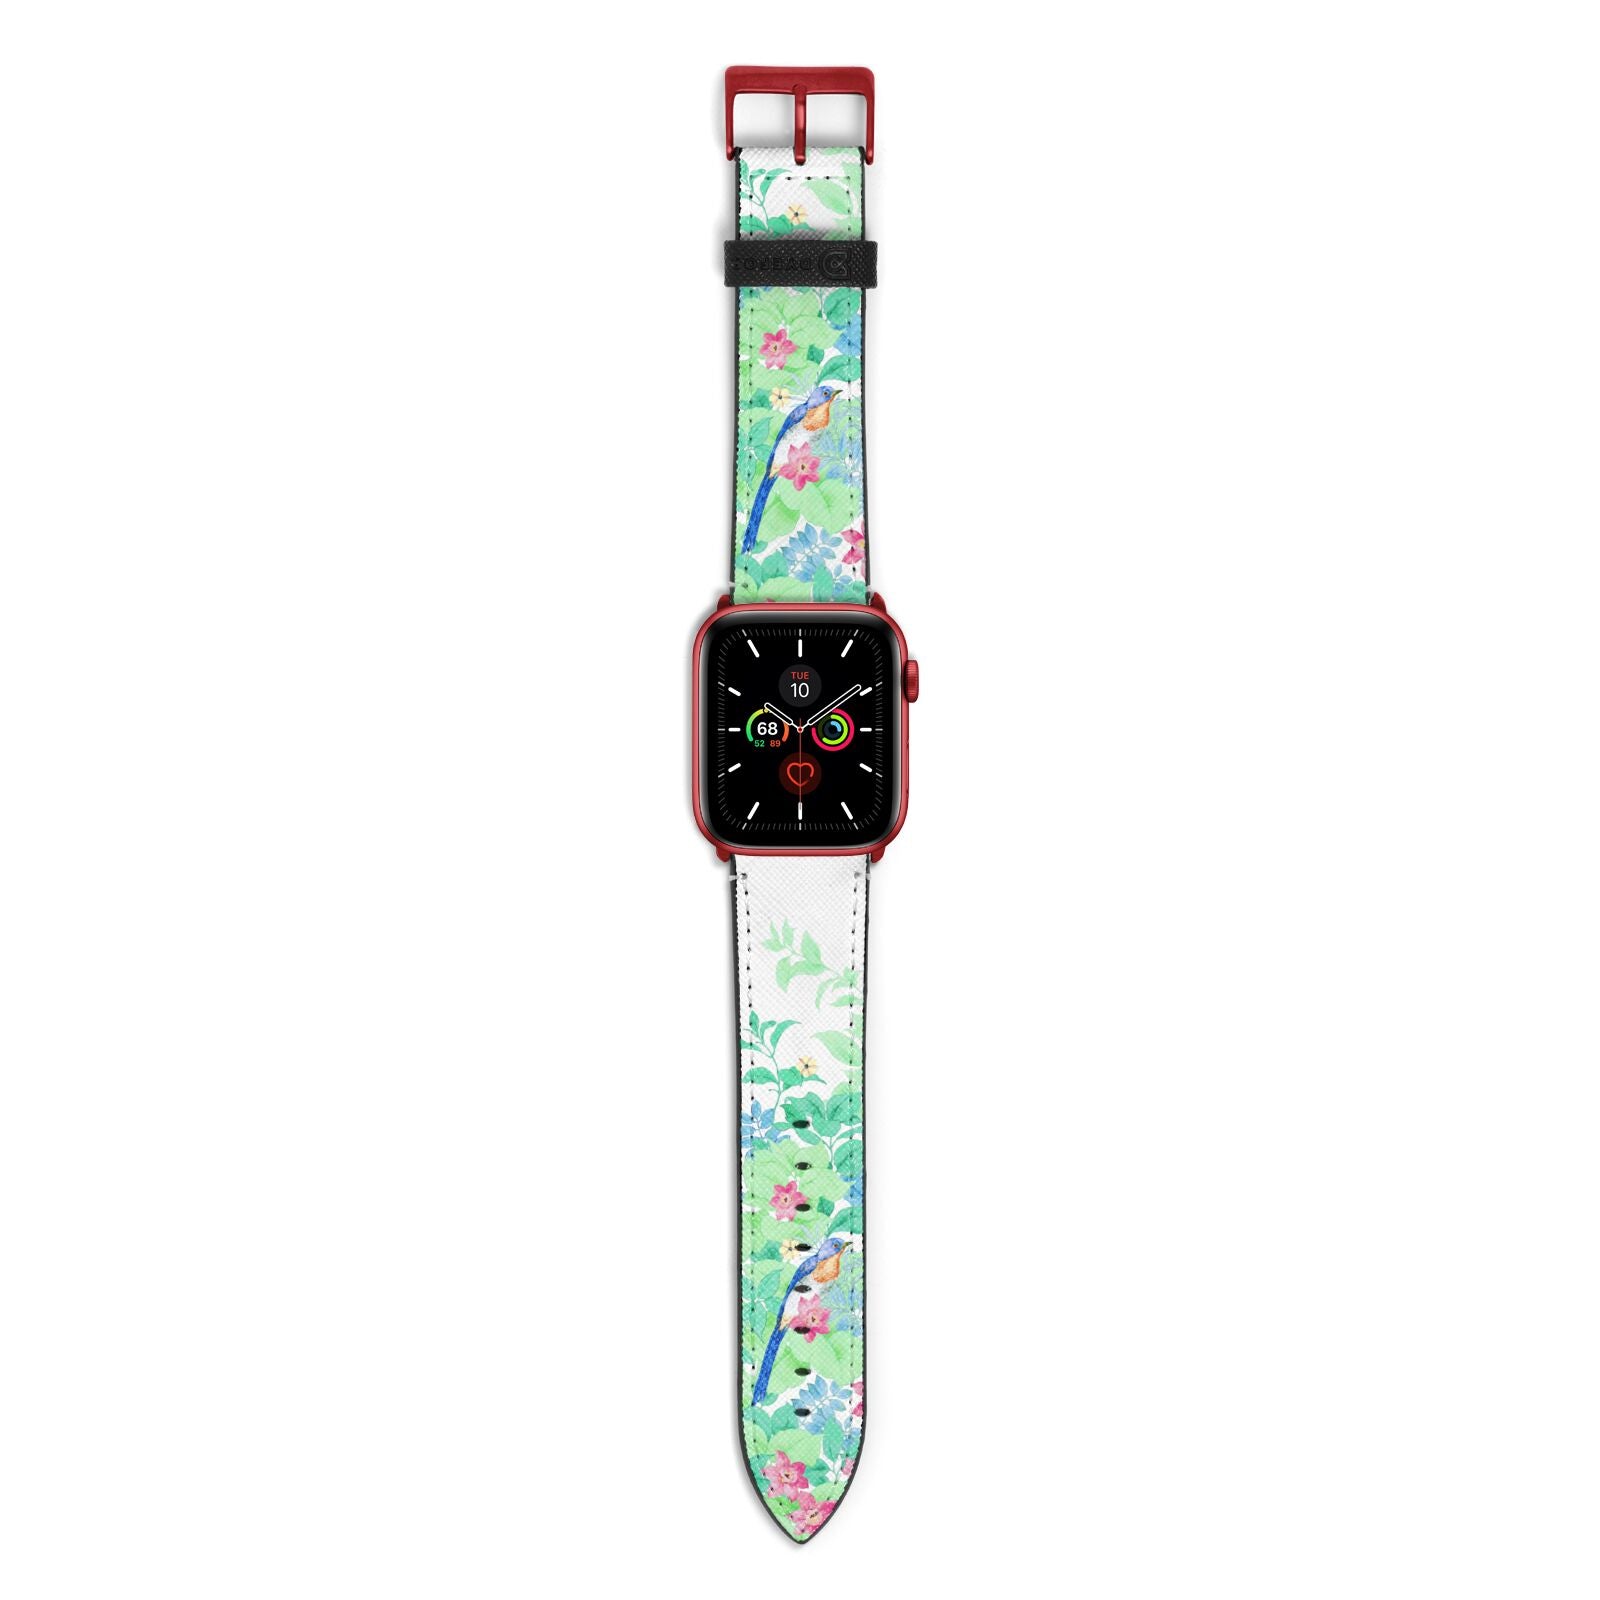 Watercolour Floral Apple Watch Strap with Red Hardware